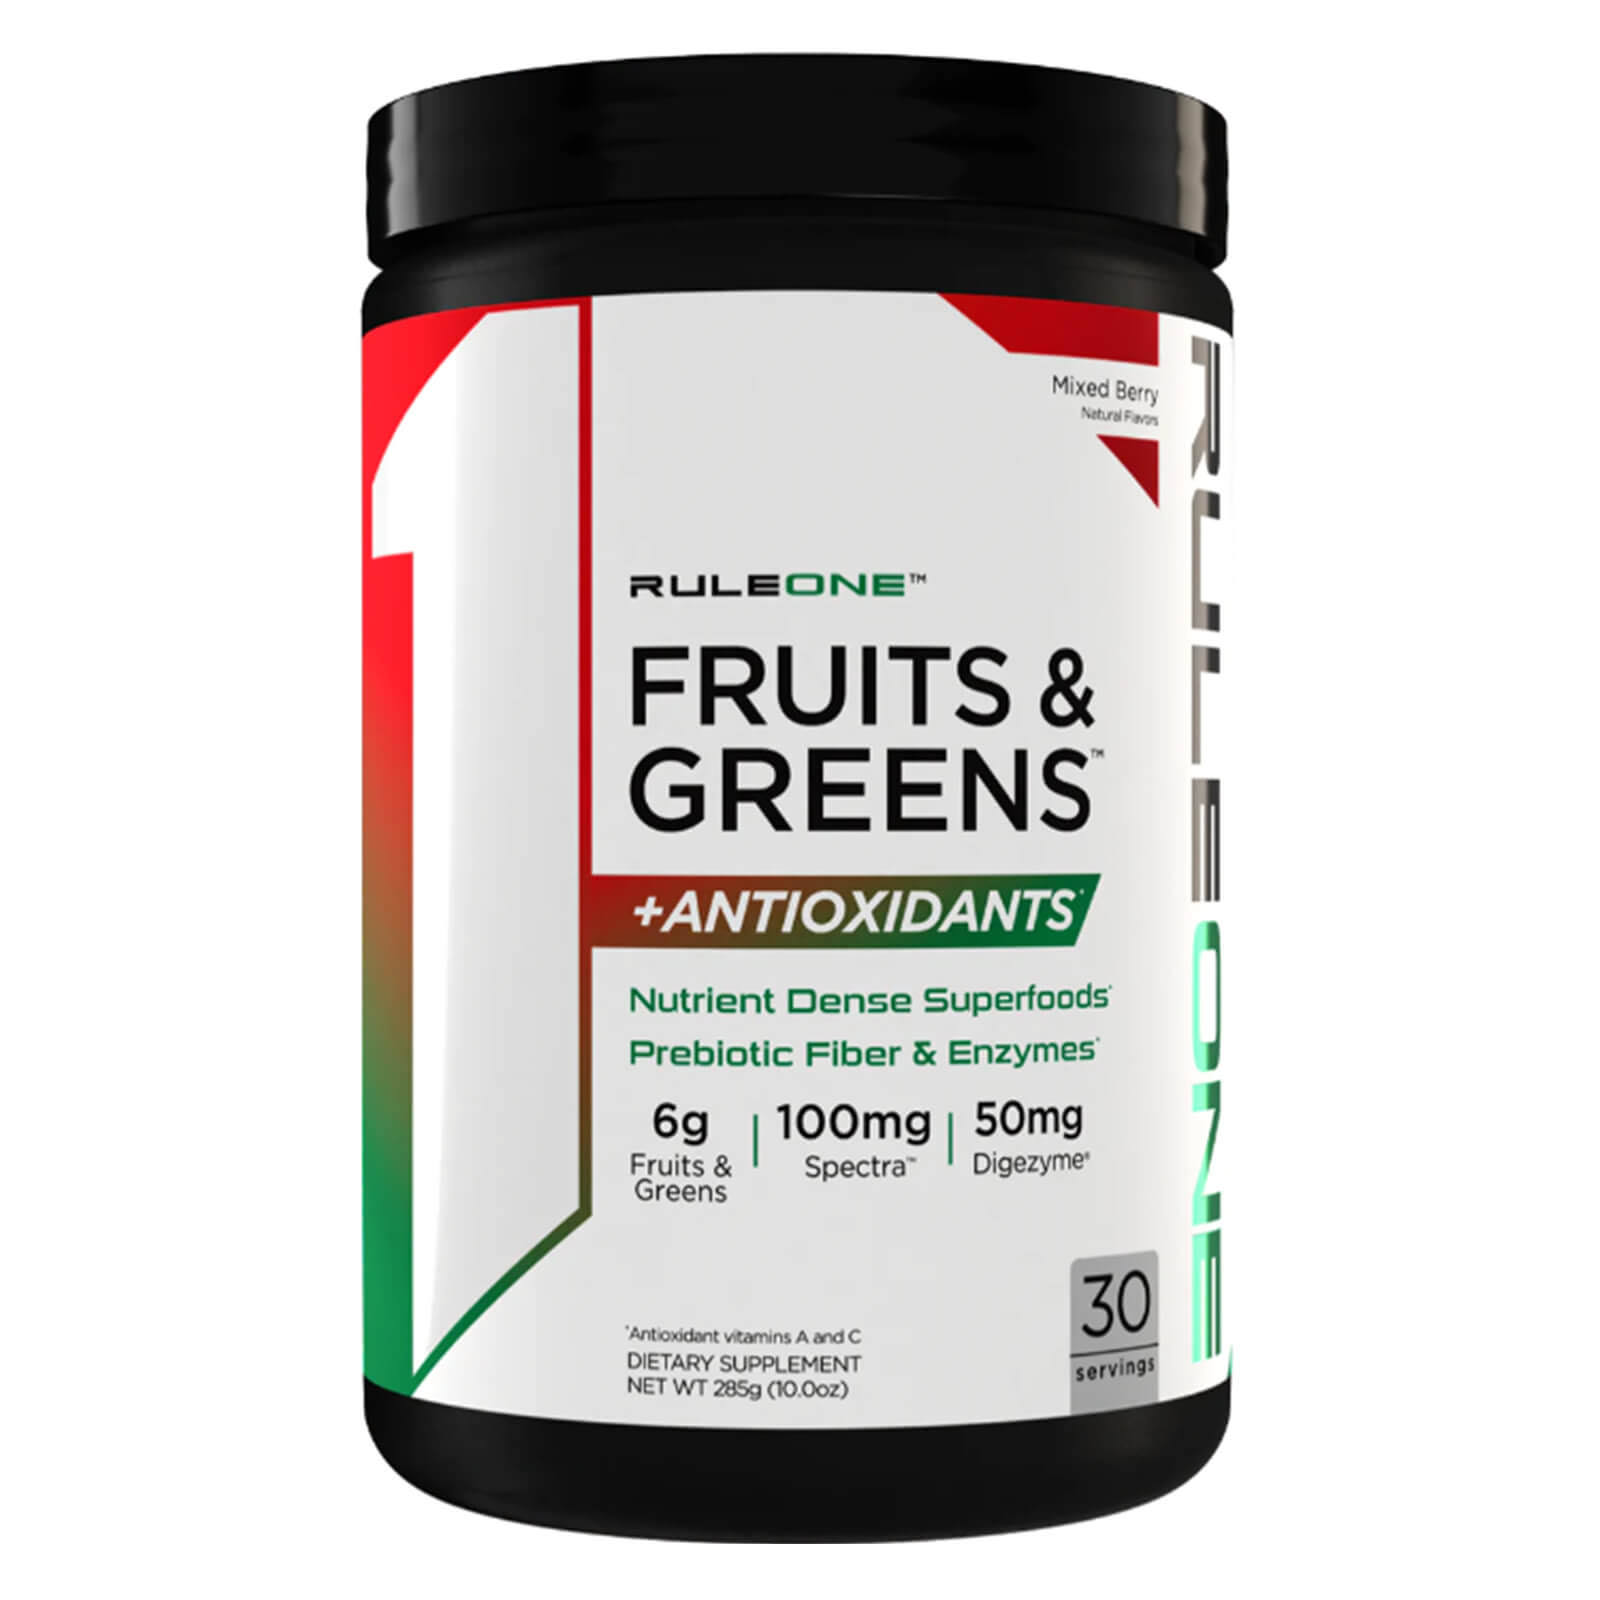 Rule One Fruits & Greens + Antioxidants, Mixed Berry - 285g